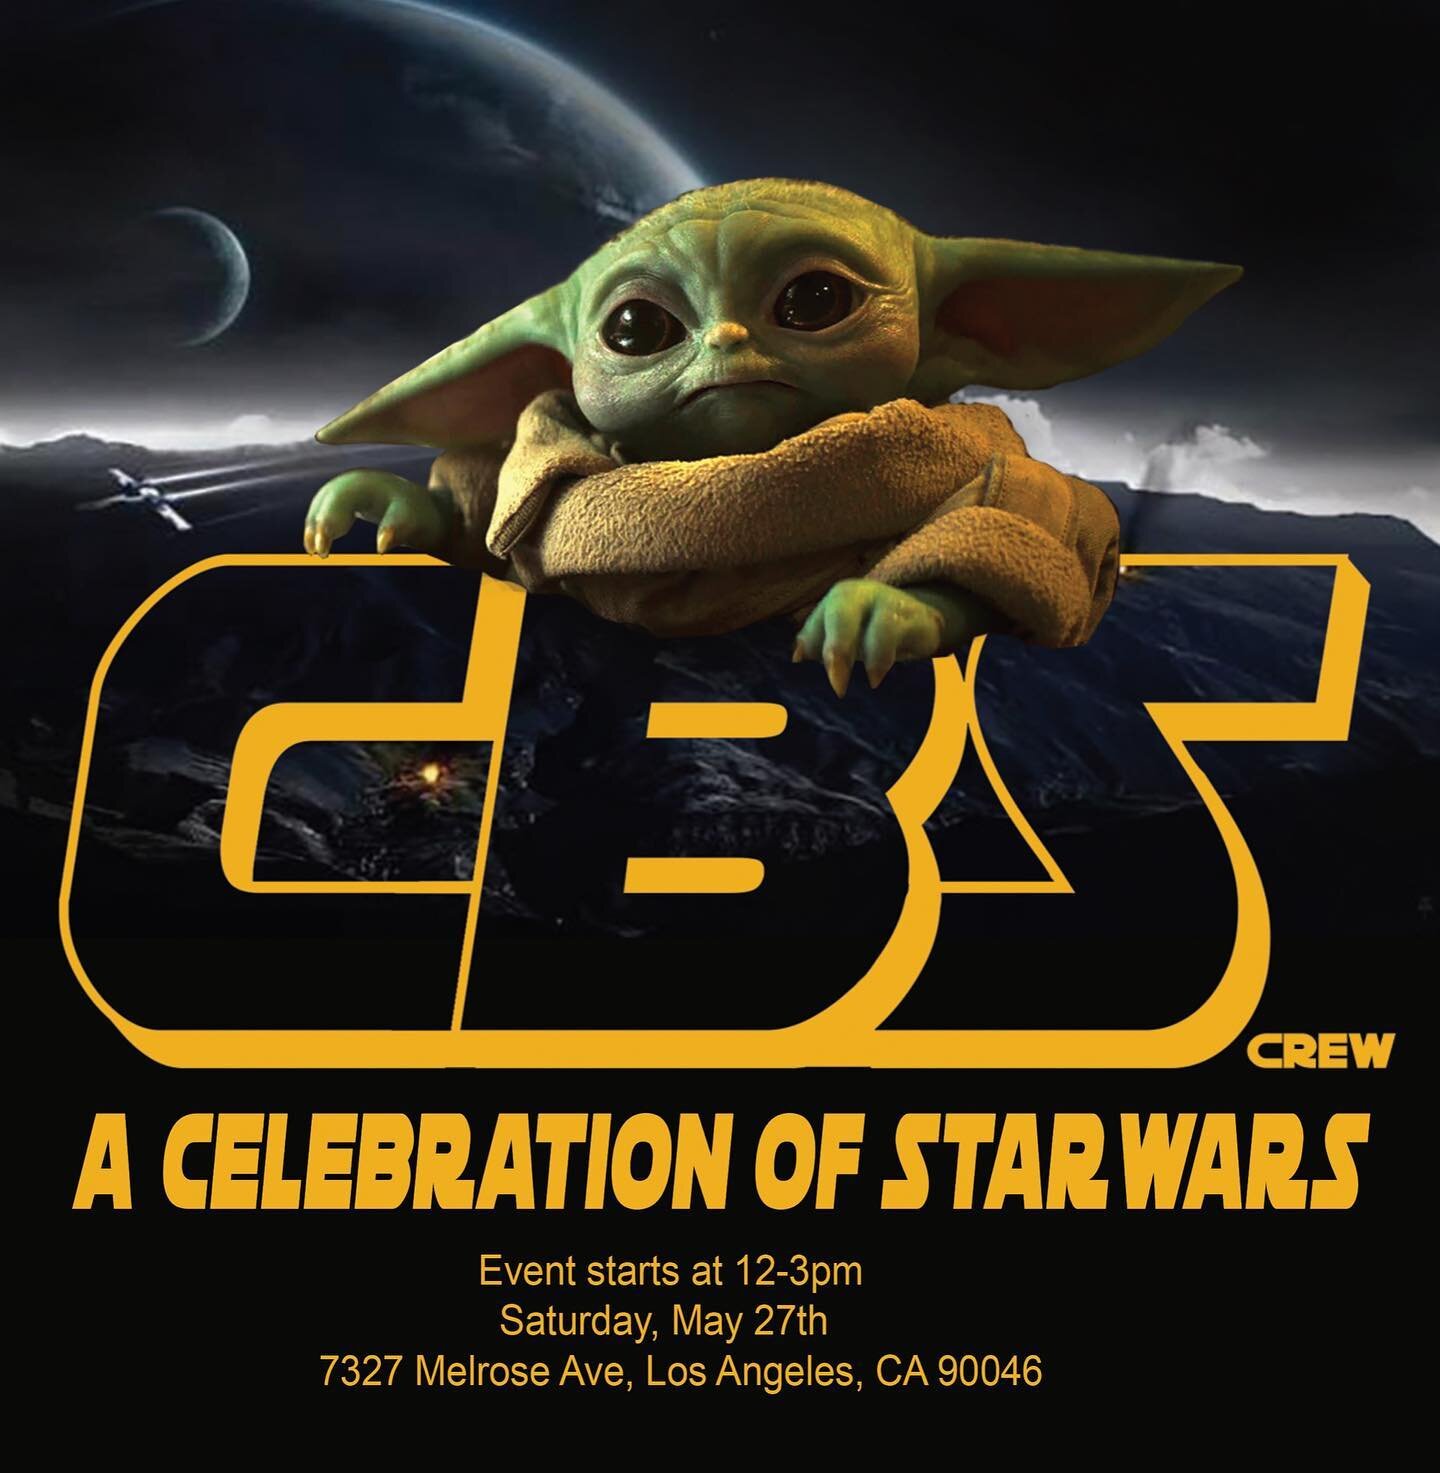 Join us for an incredible experience curated by Dytch66 &amp; Cbs crew at the world-famous graffiti walls on Melrose! Prepare to embark on a journey to a galaxy far, far away as we unveil a spectacular Star Wars installation, brought to life by the c